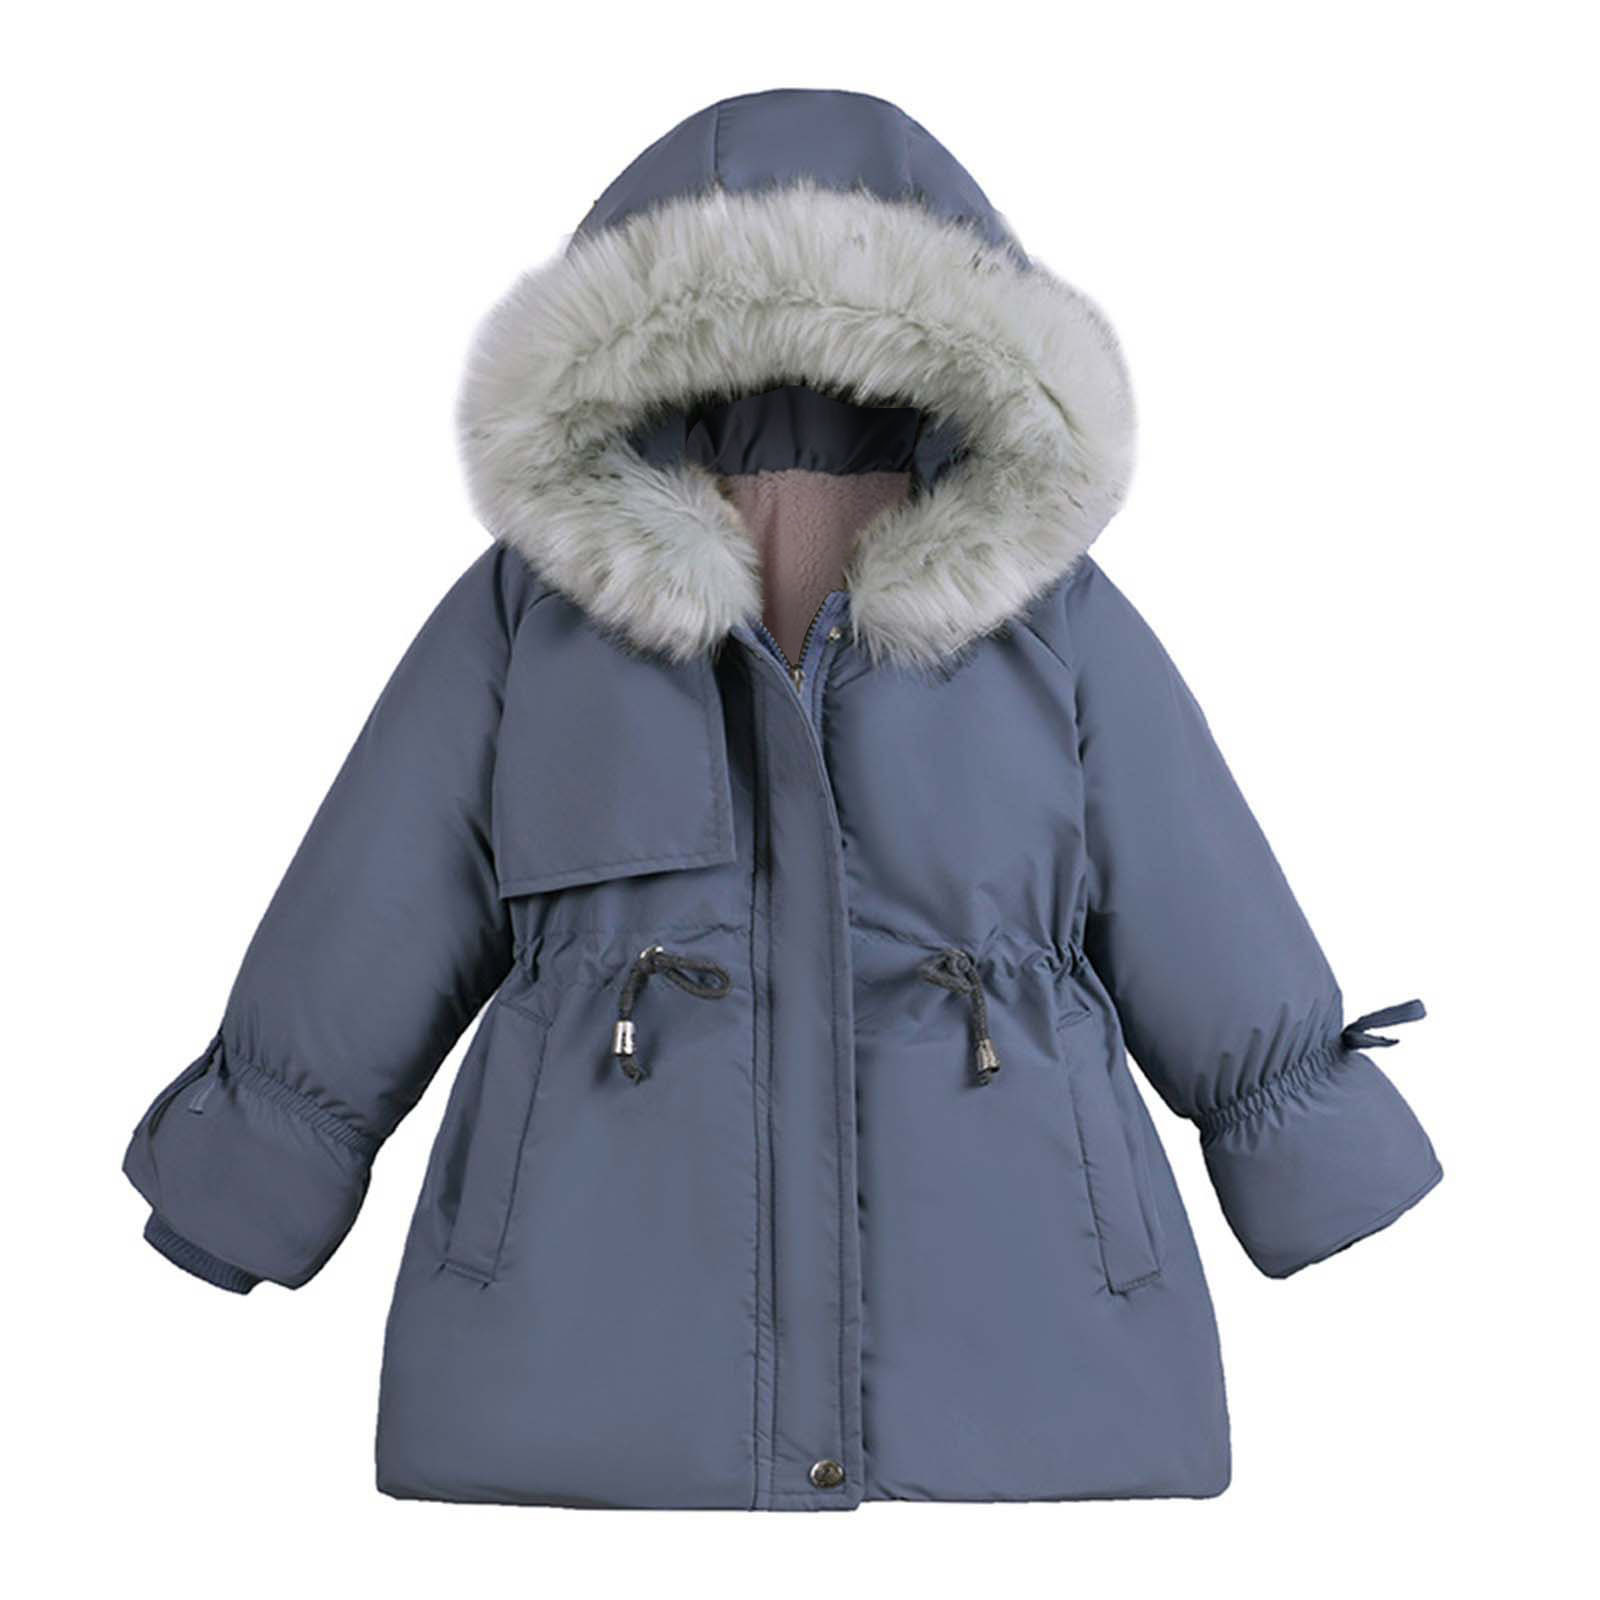 Children's Cotton Coat Girls Winter Slim Fit Warm Coats Puffer Coat Solid Color Thickened Hooded Fashion Casual Windproof Jacket Faux Fur Hood Parka Pocket Overcoat - image 1 of 8